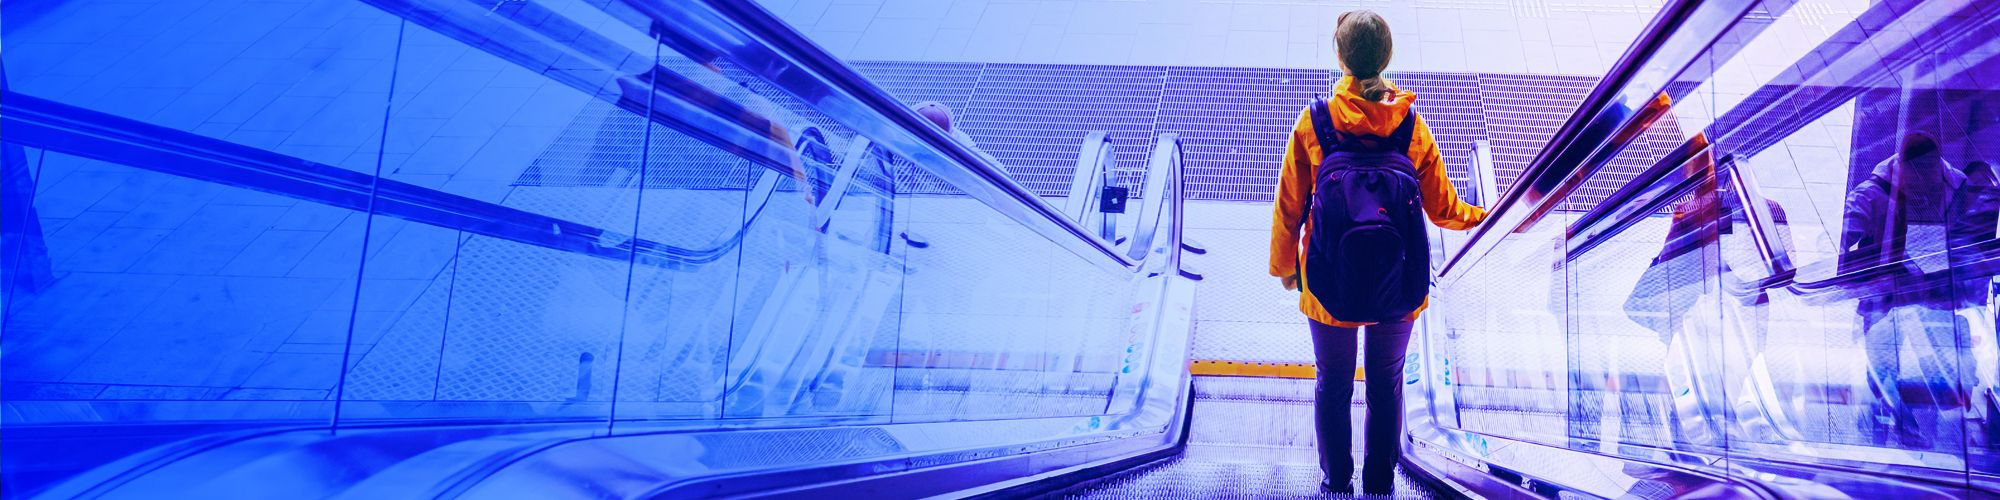 woman with backpack going down on escalator